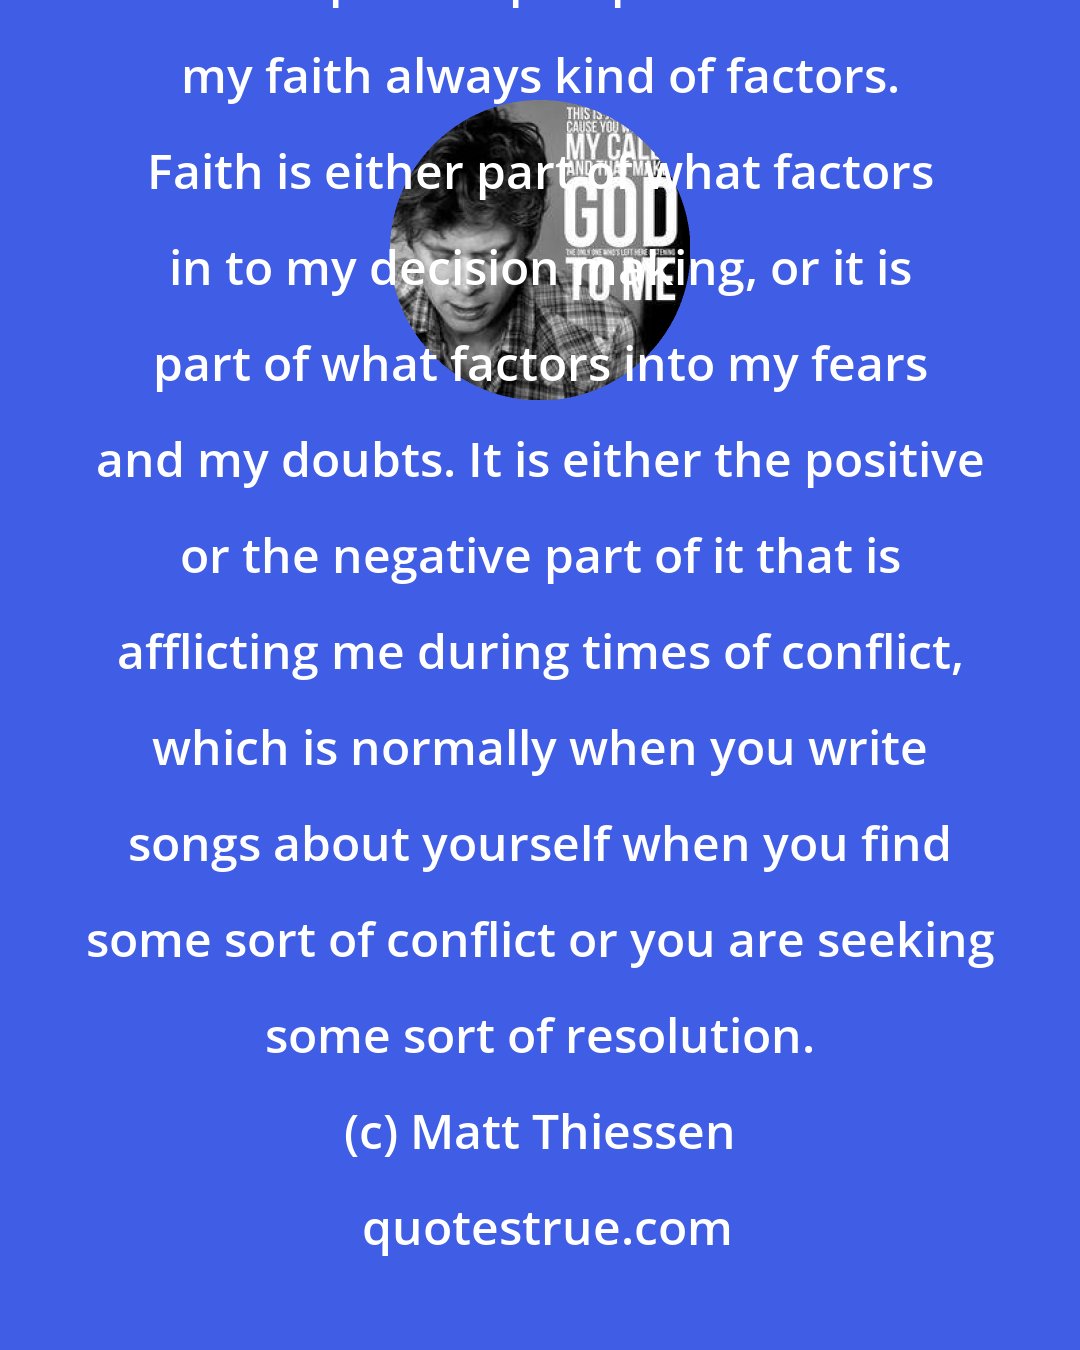 Matt Thiessen: I fell like a lot of times, when I write a song, it is coming from an introspective perspective that my faith always kind of factors. Faith is either part of what factors in to my decision making, or it is part of what factors into my fears and my doubts. It is either the positive or the negative part of it that is afflicting me during times of conflict, which is normally when you write songs about yourself when you find some sort of conflict or you are seeking some sort of resolution.